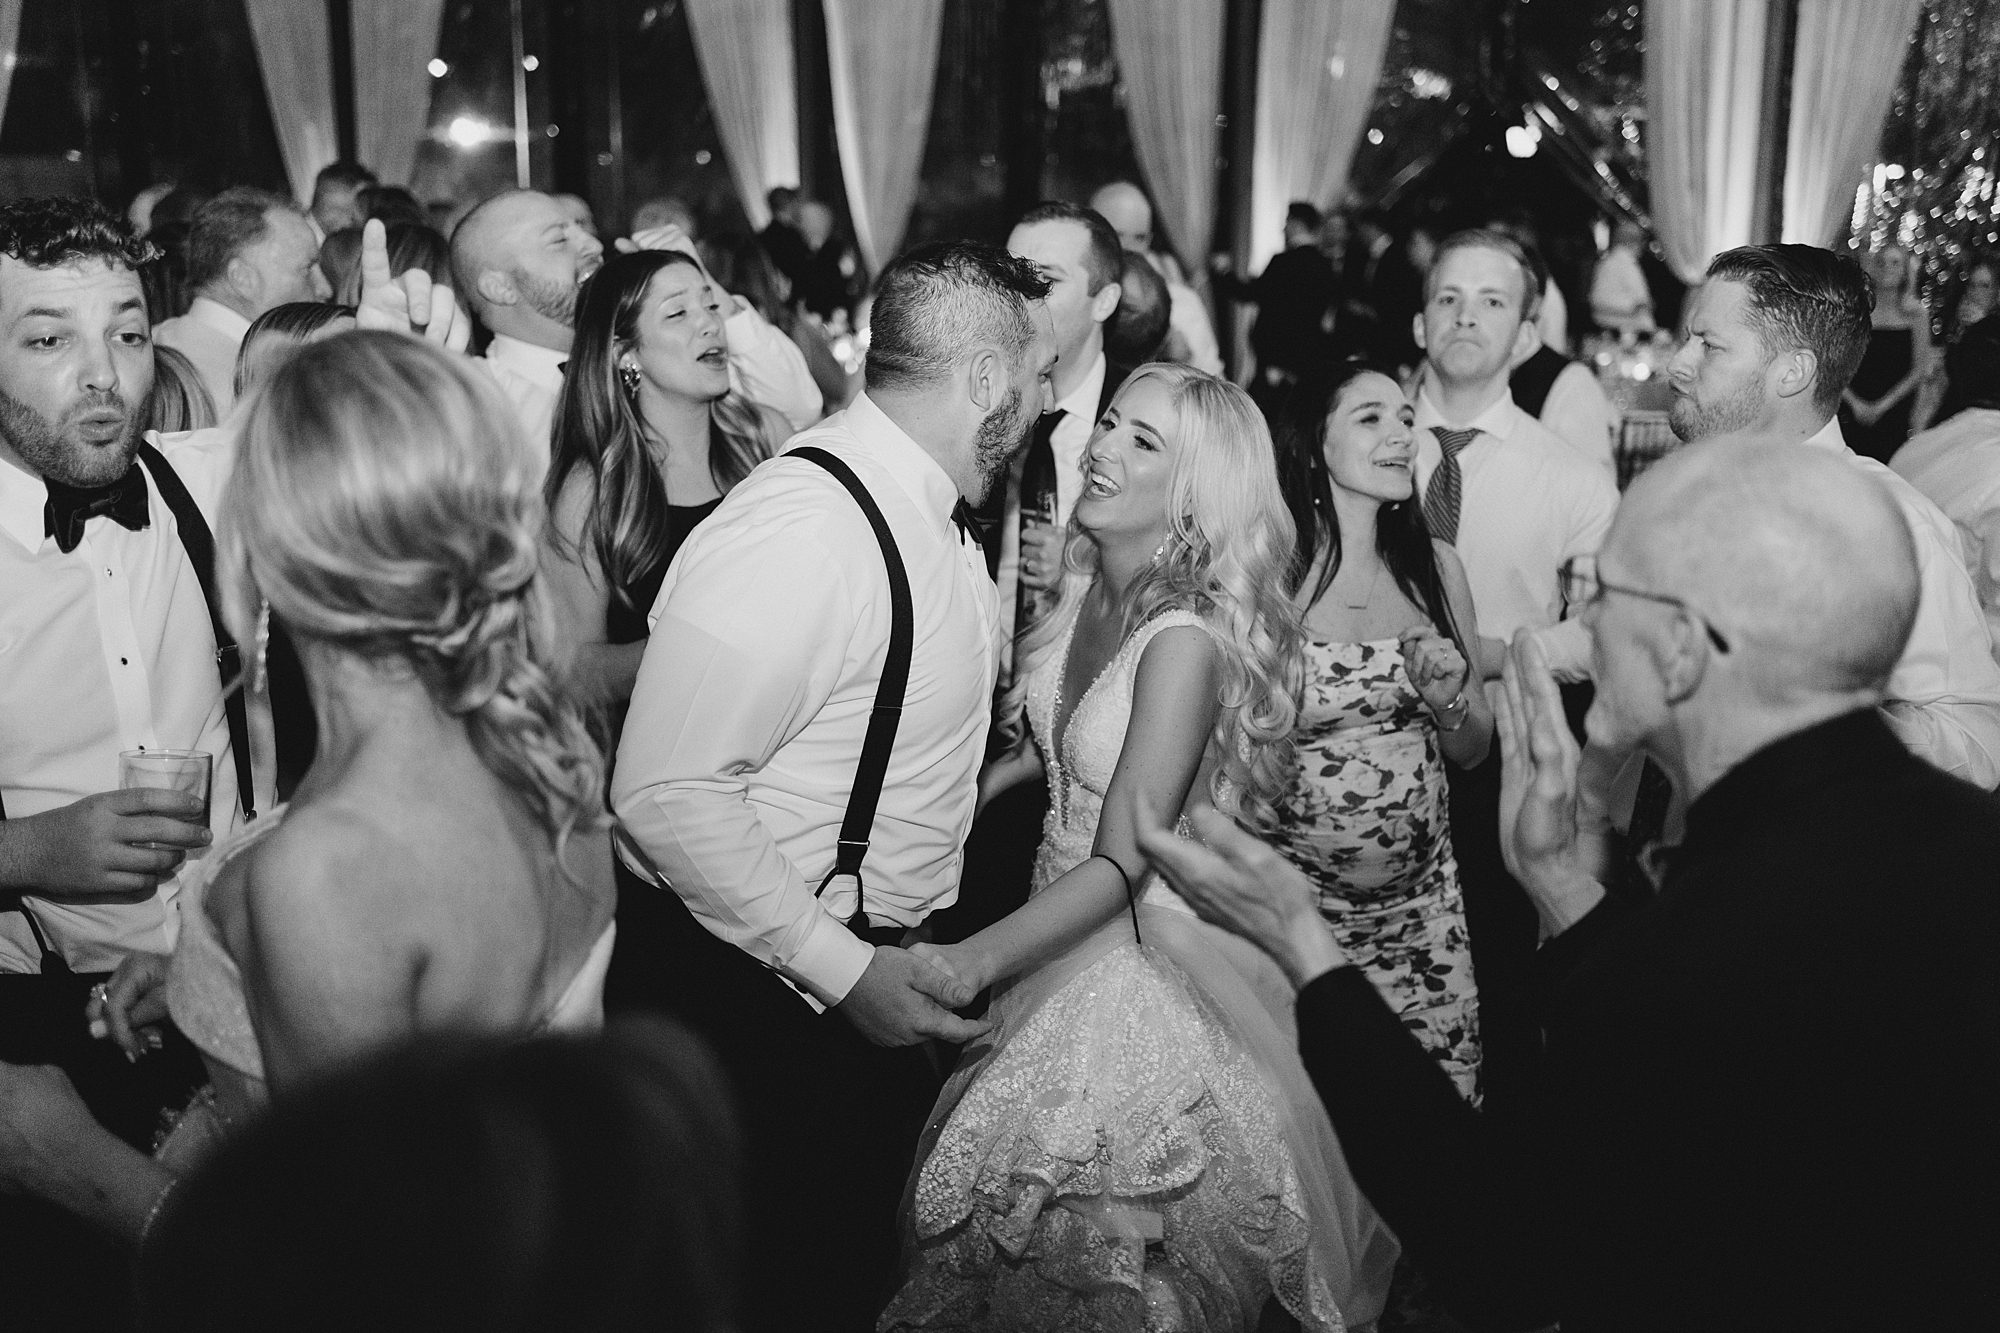 newlyweds dance at reception surrounded by wedding guests